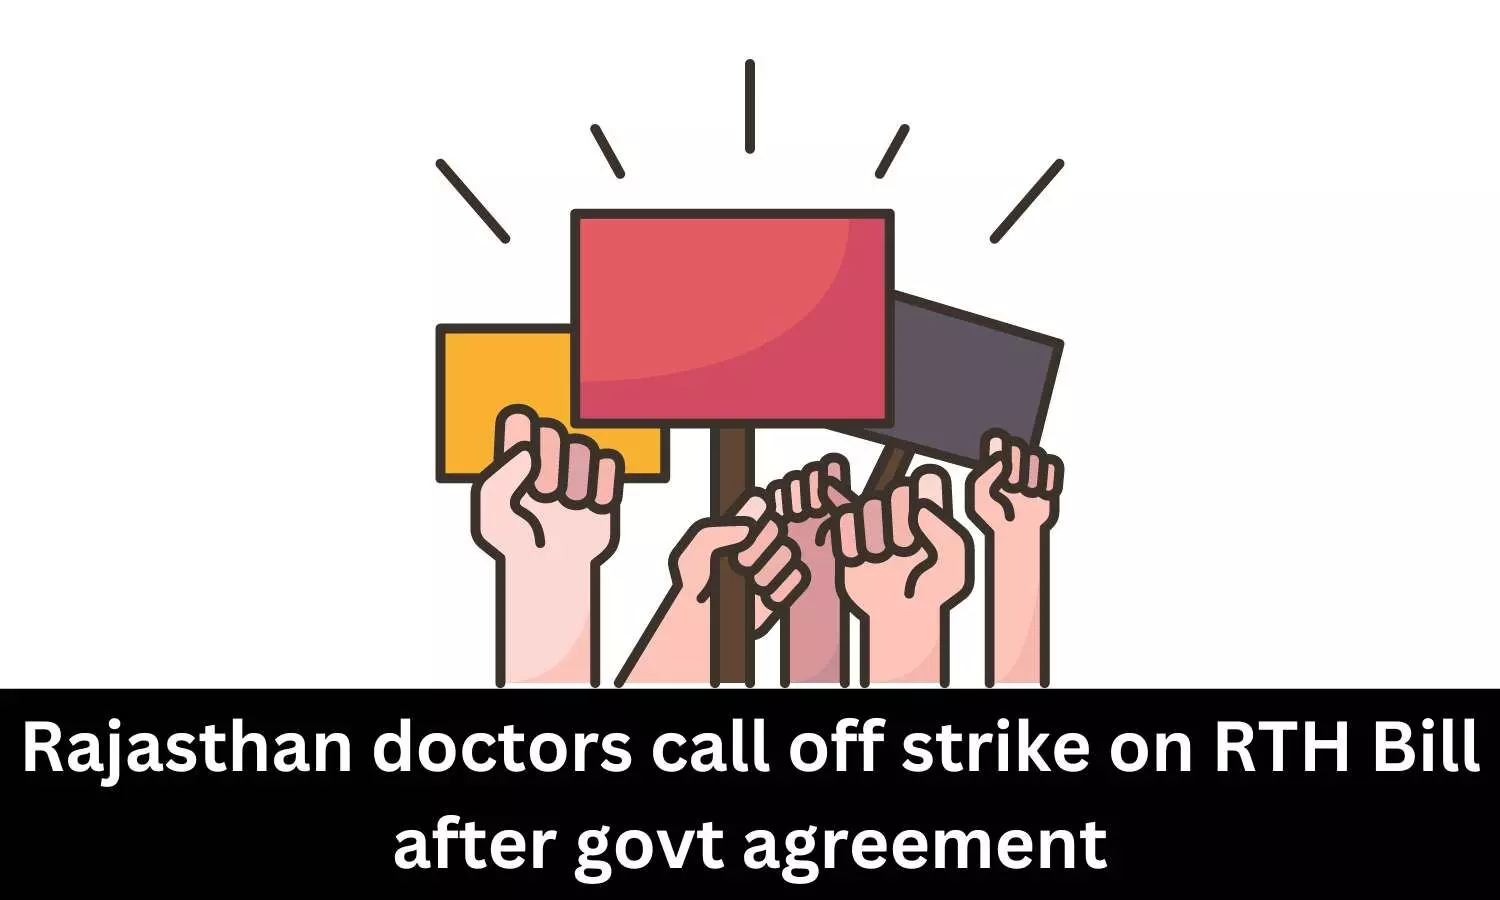 Right to Health Bill: Rajasthan doctors call off strike